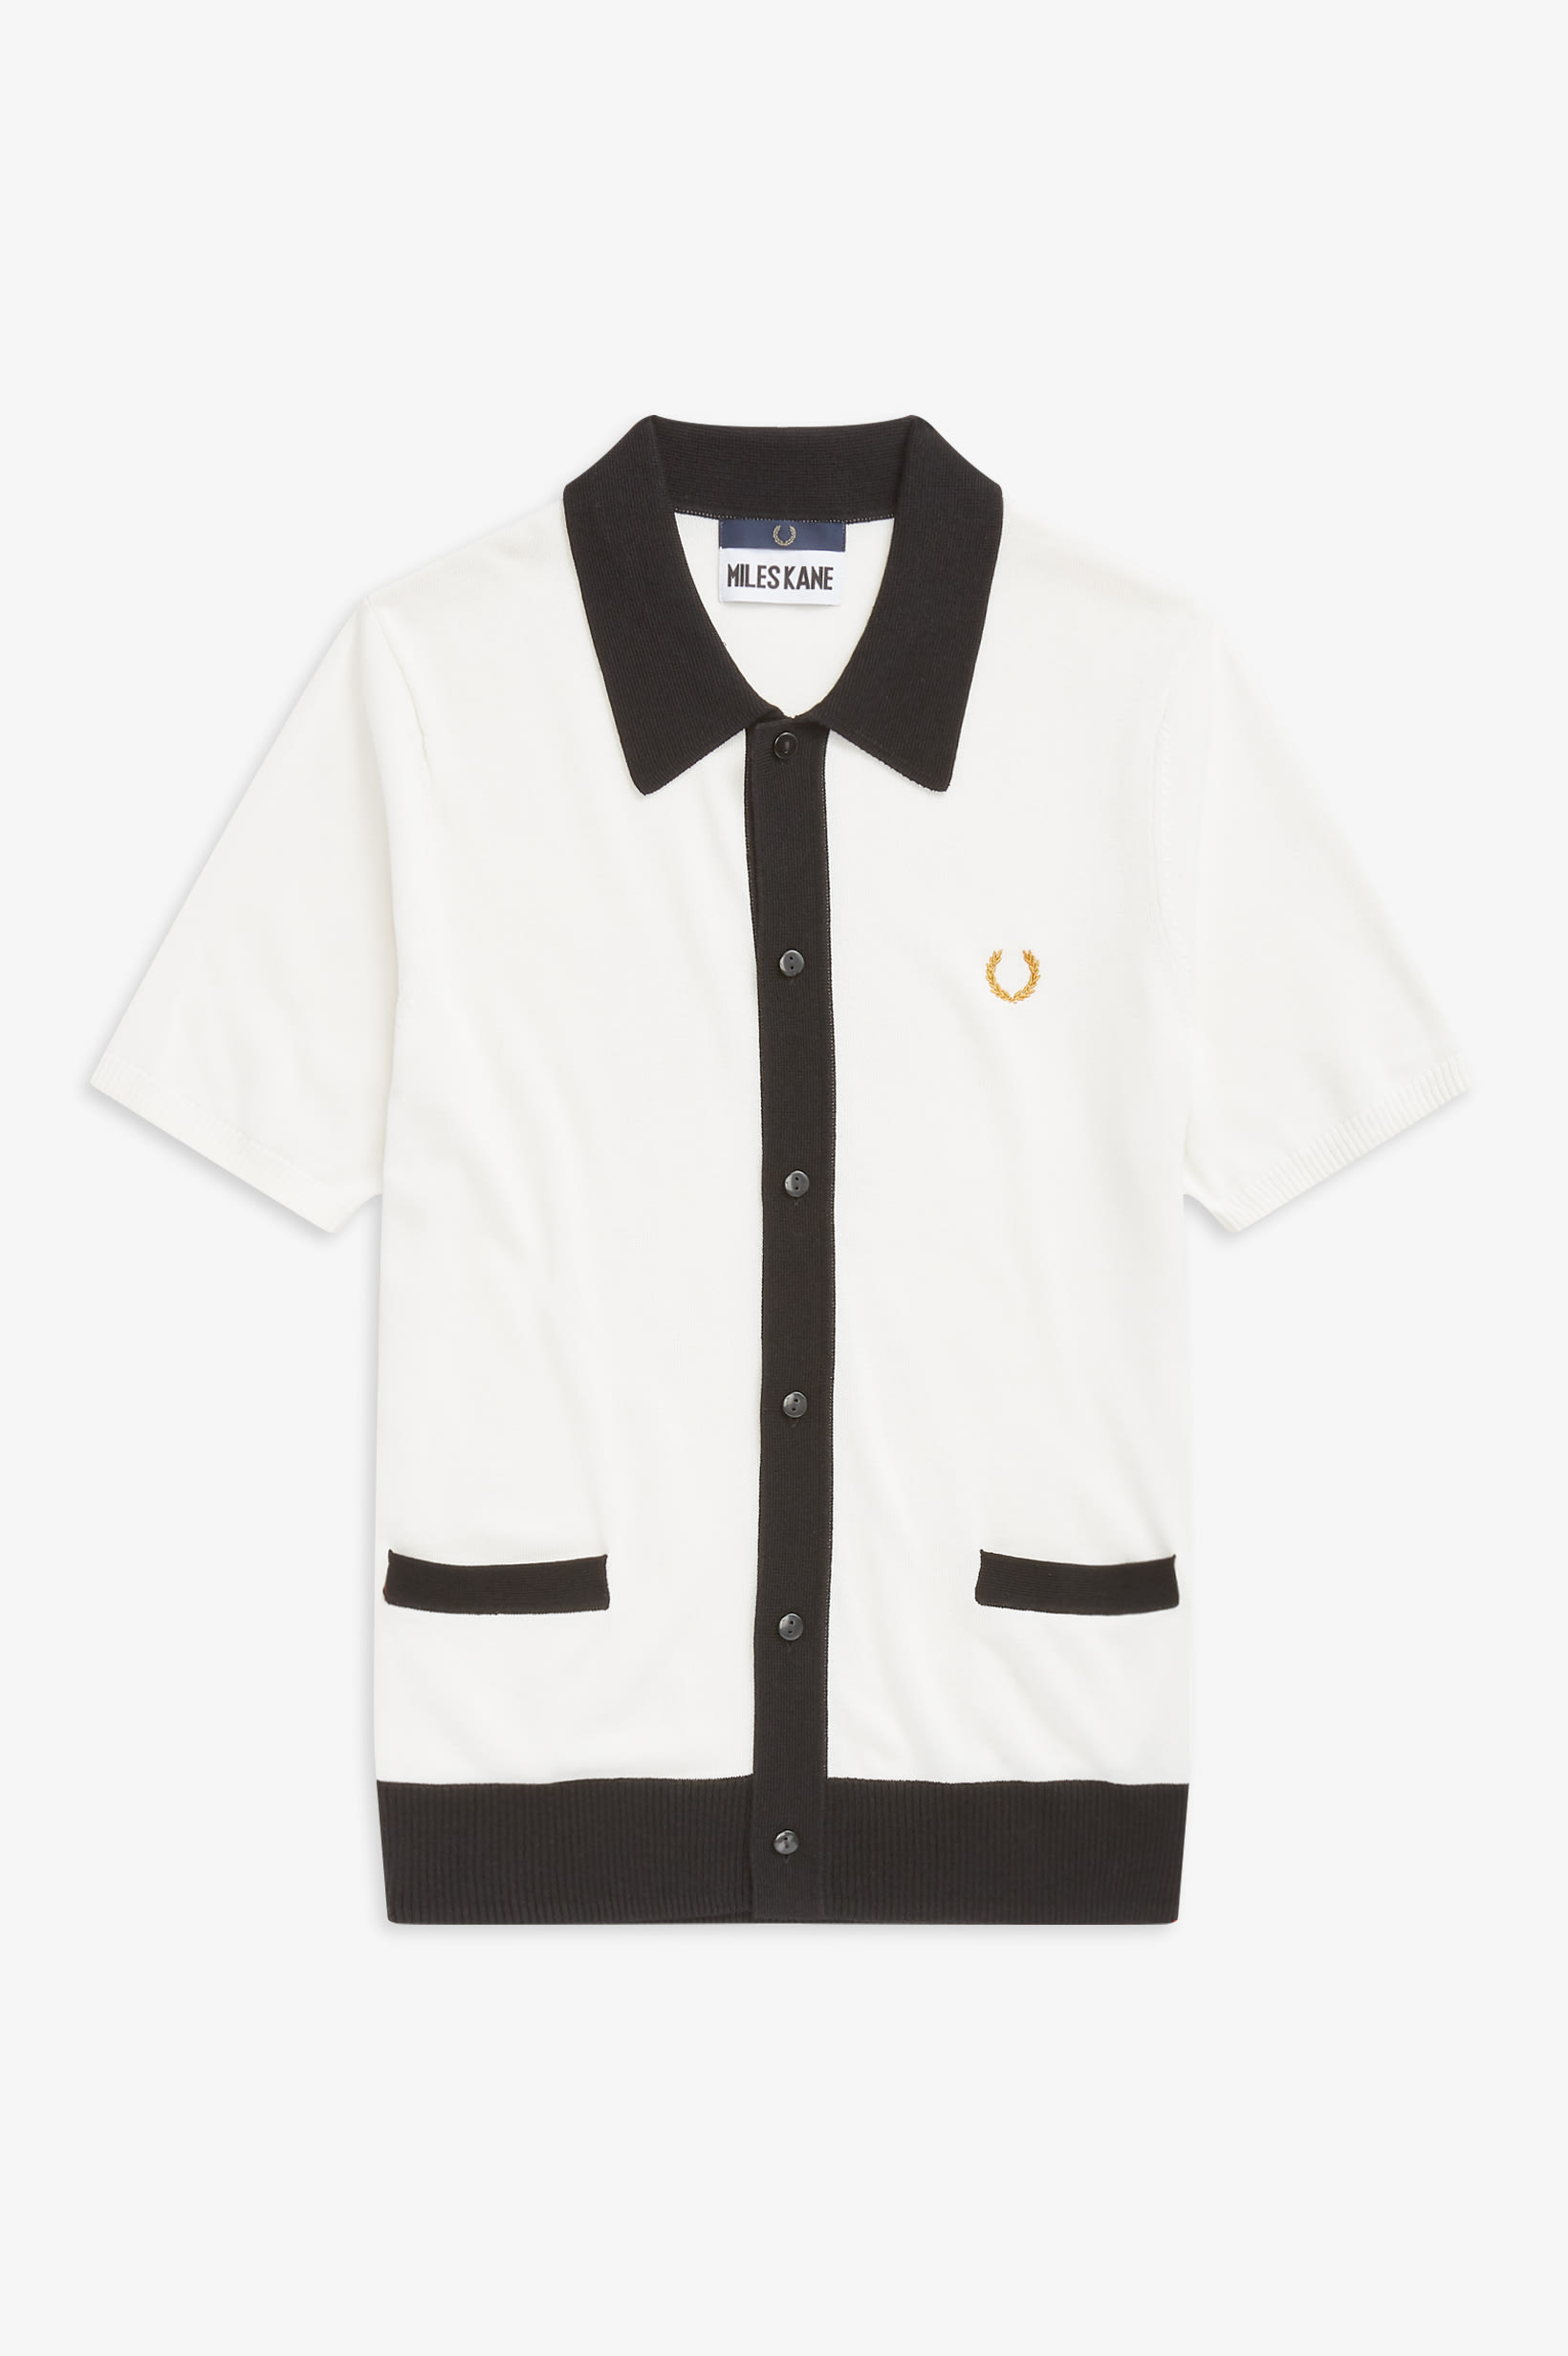 fred-perry-miles-kane-19-3